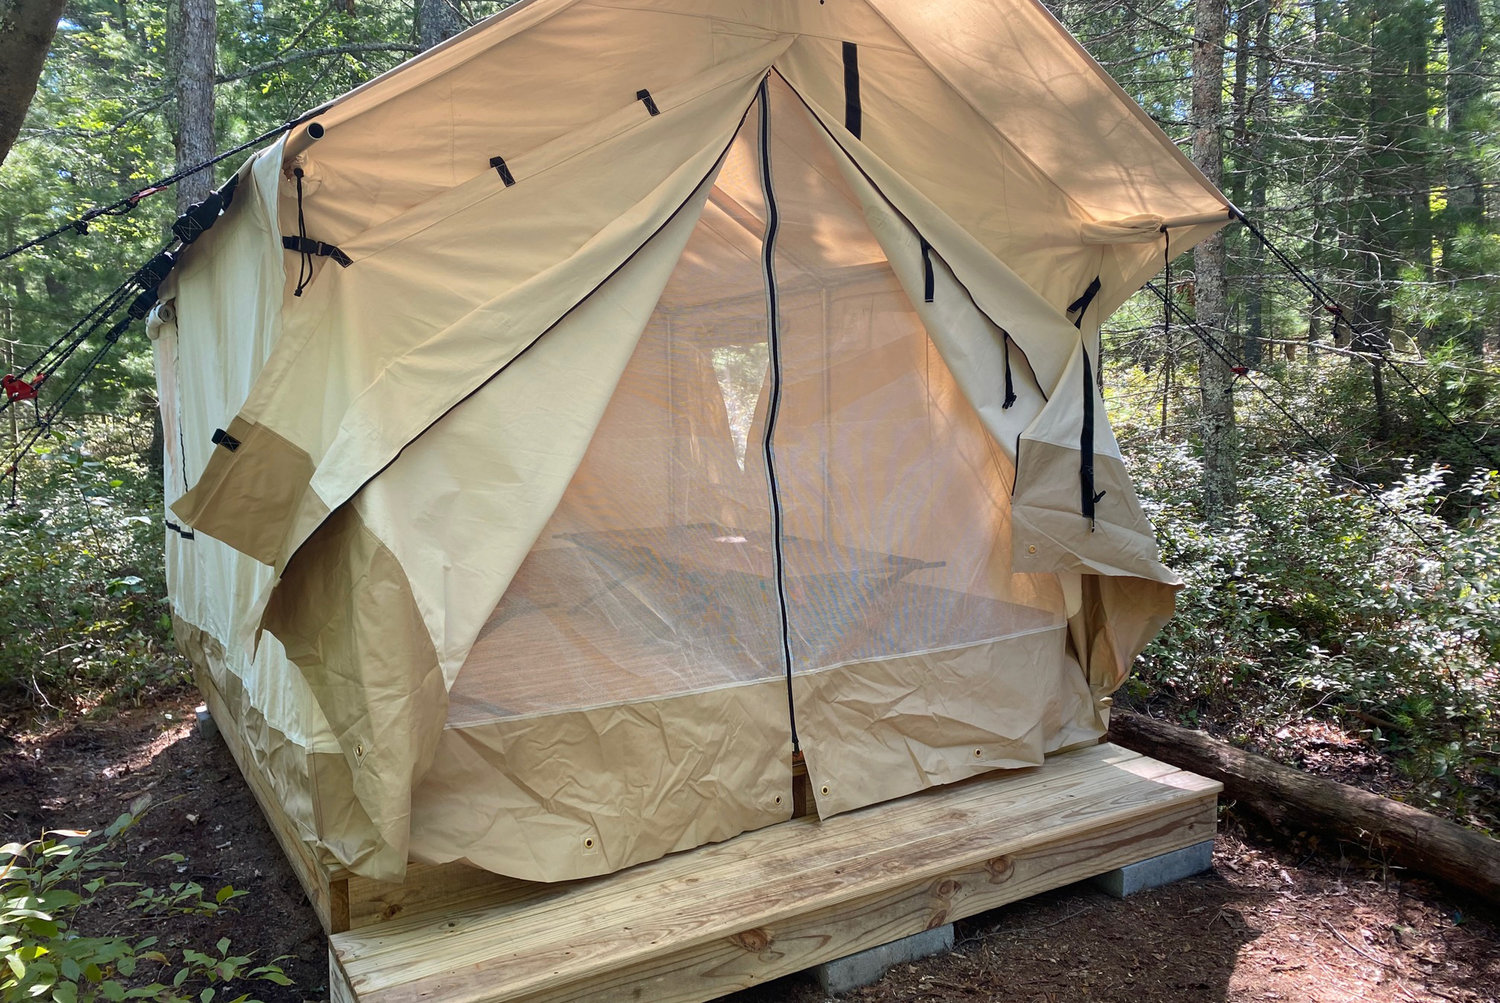 Wooden platforms keep tents off the ground and glampers dry and steady